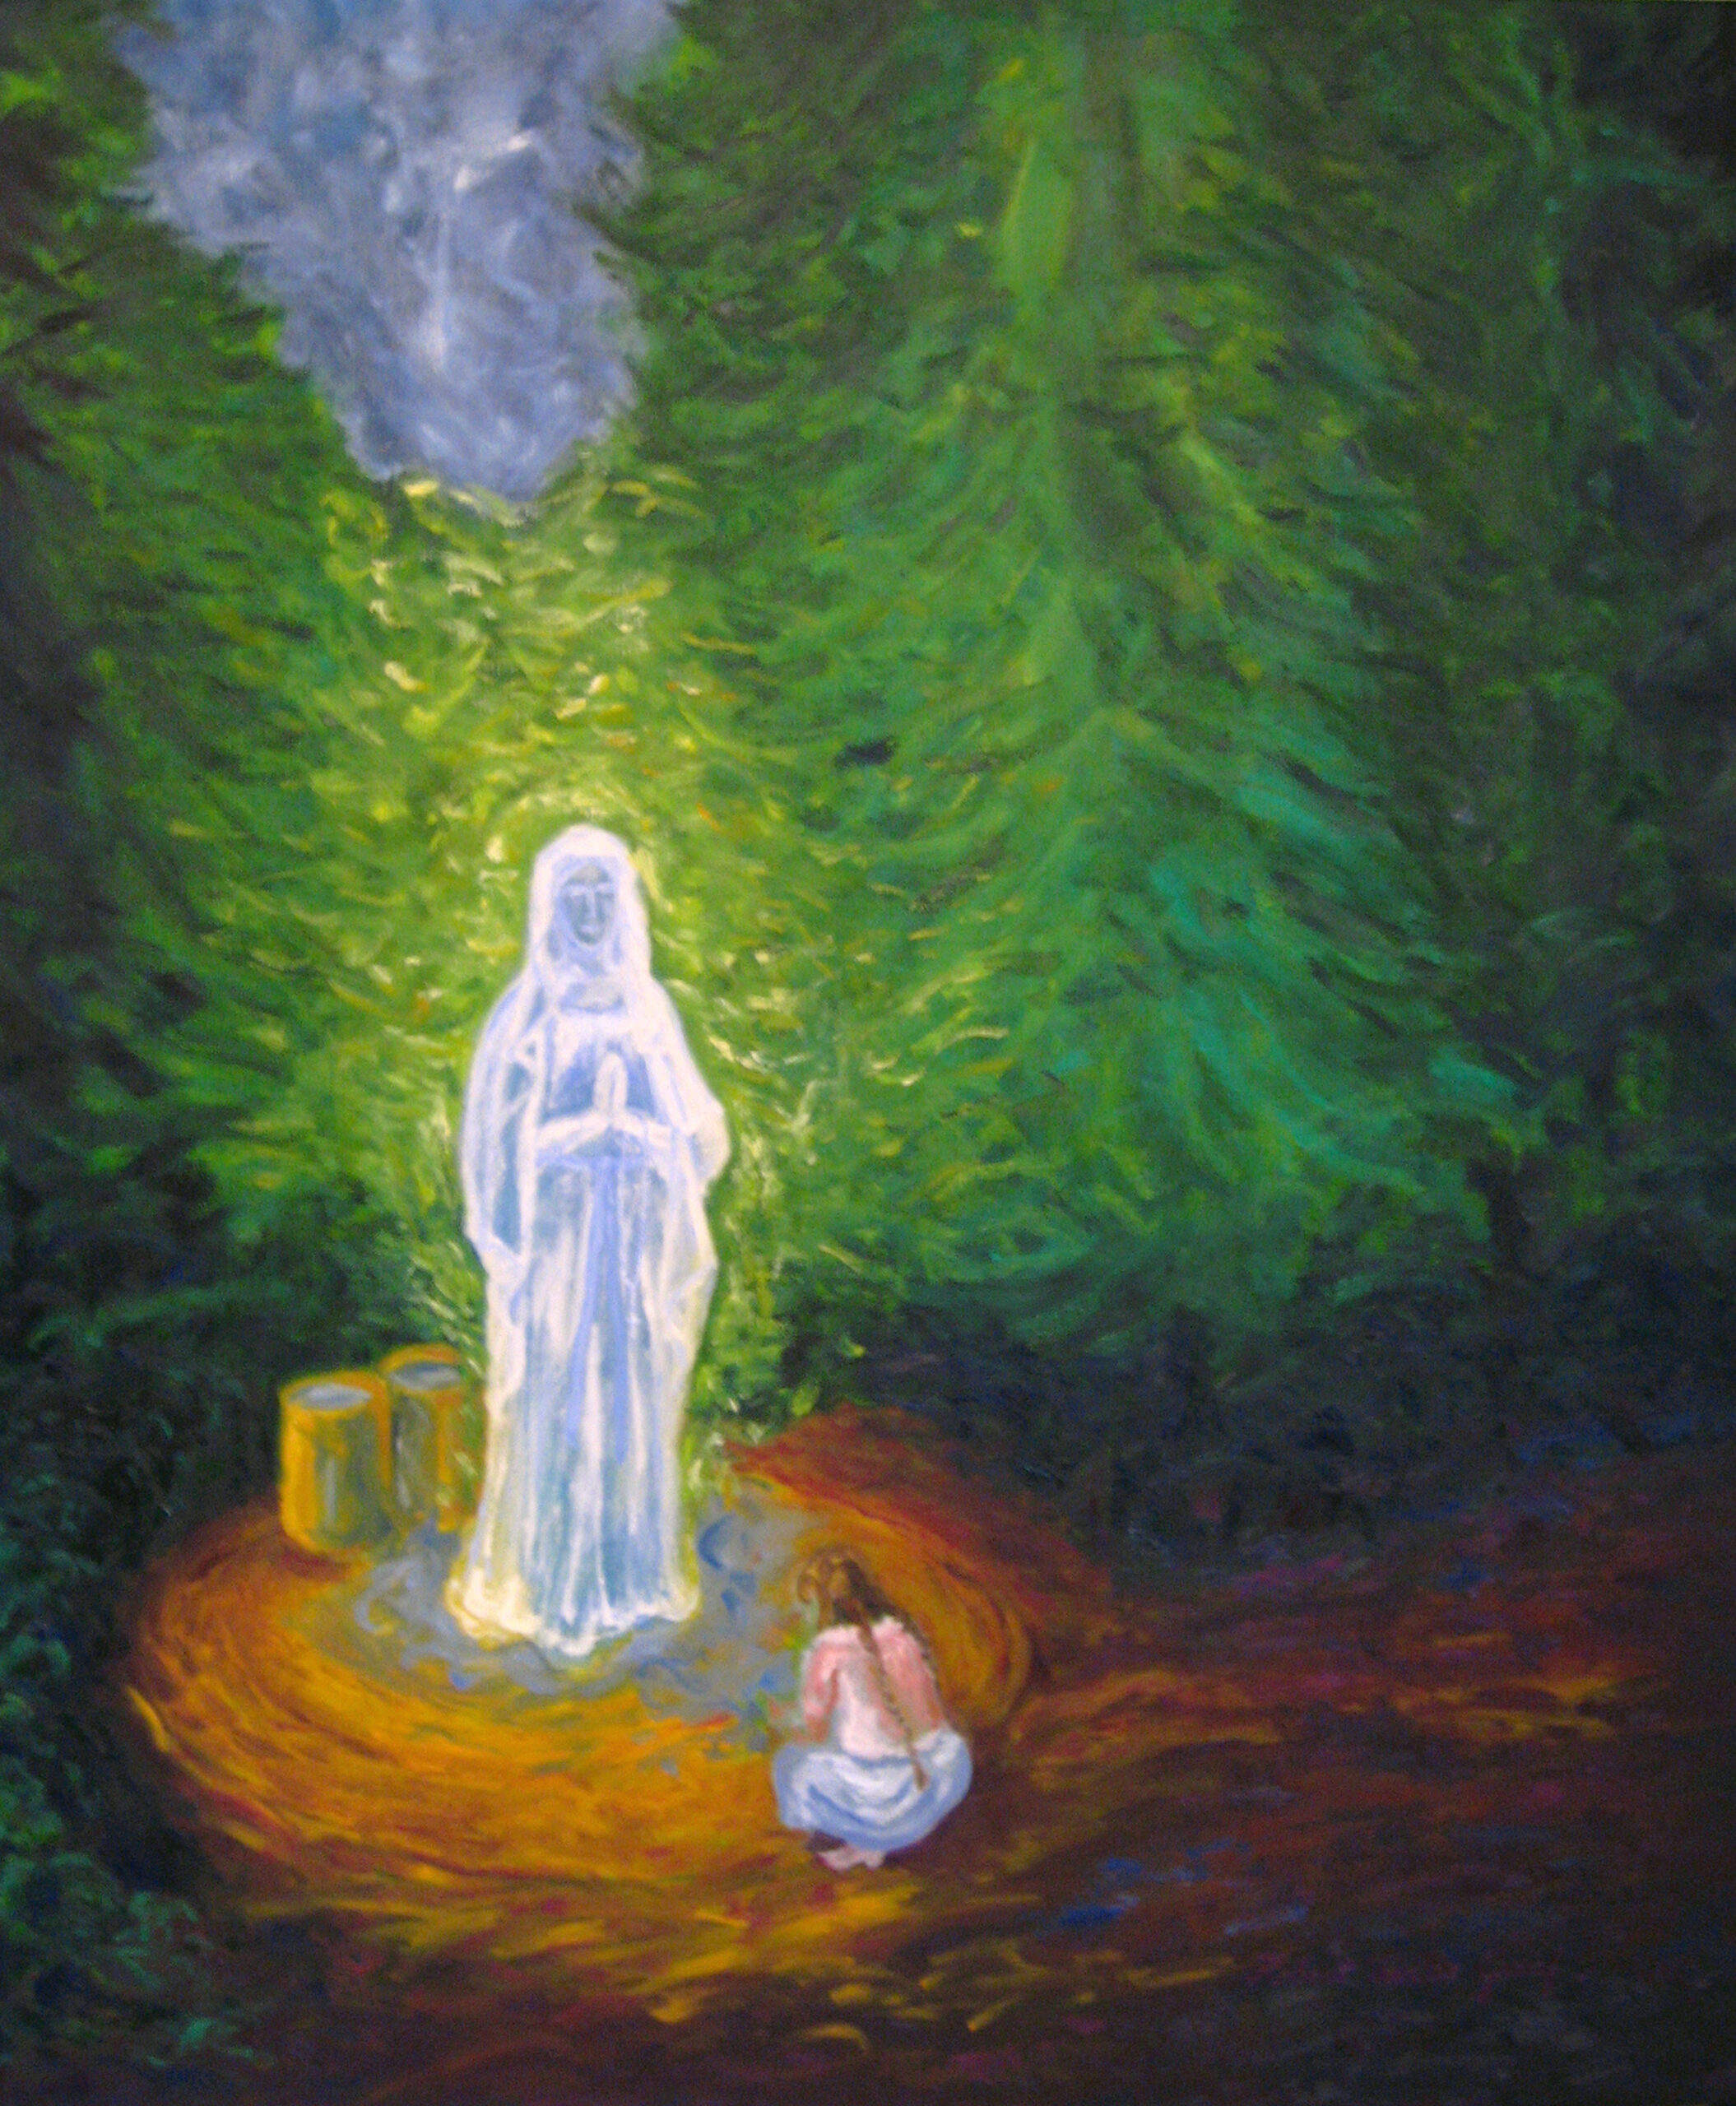 Woman Kneeling for Holy Virgin Mary